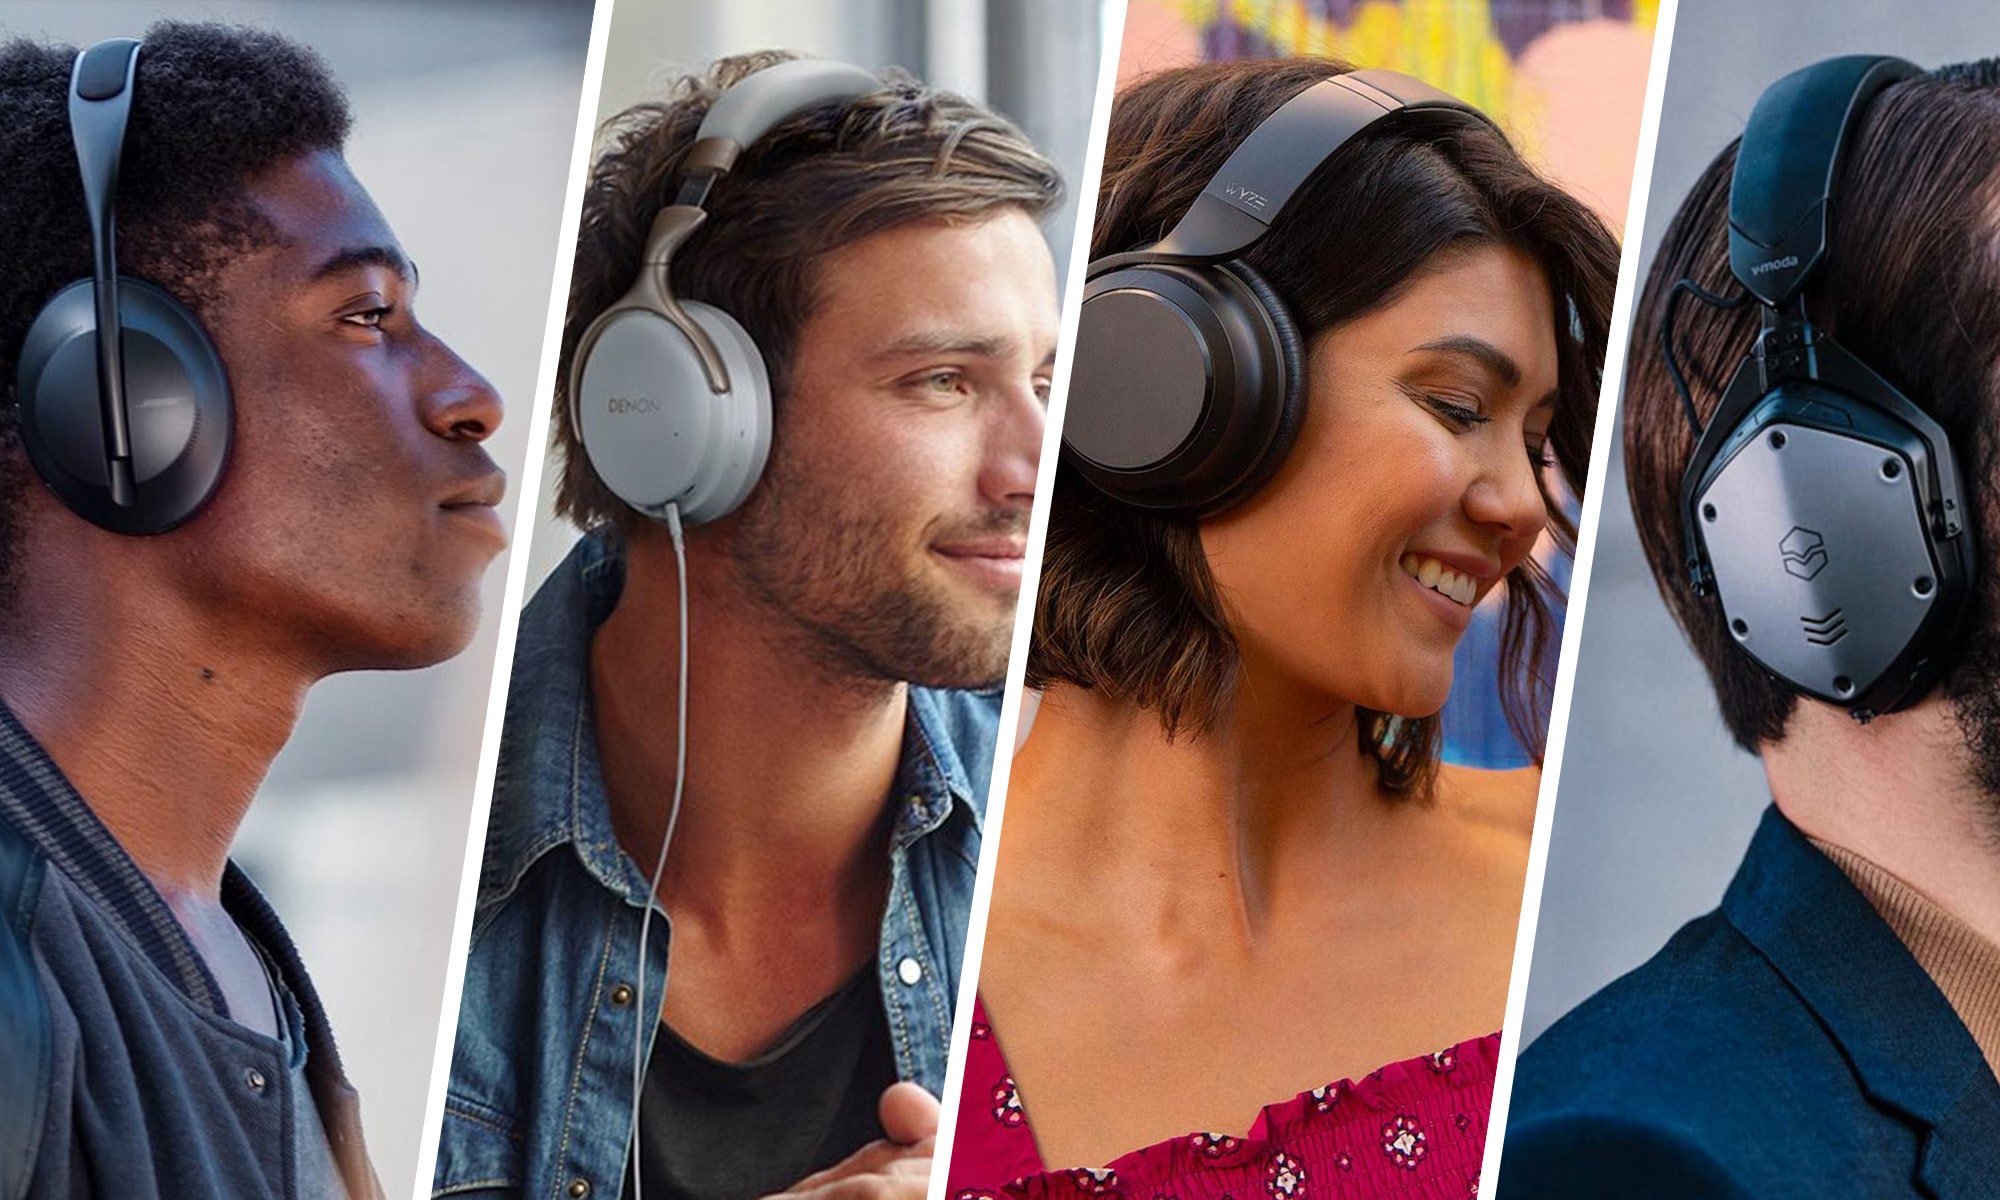 The best noise-canceling headphones that you can buy now to help you stay focused